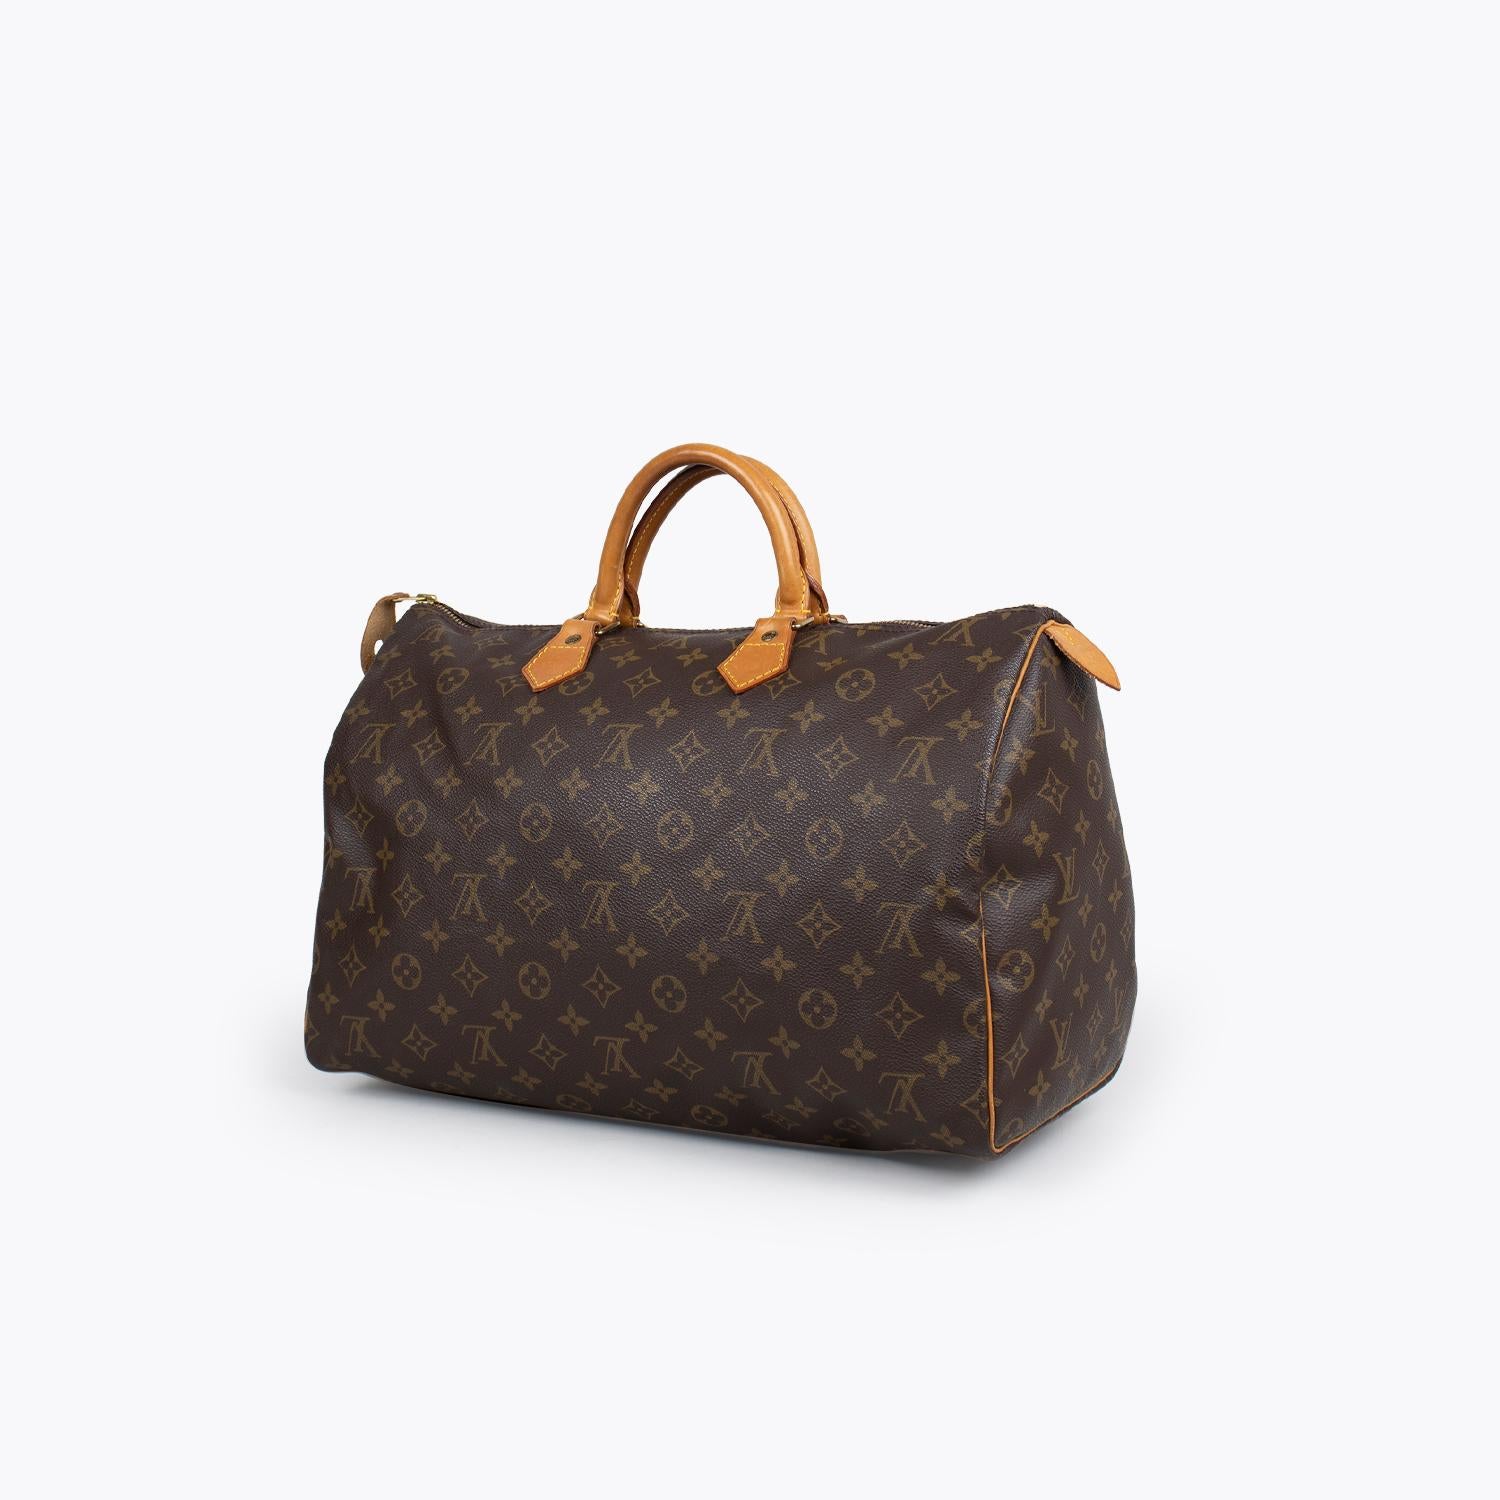 Brown and tan monogram coated canvas Louis Vuitton Speedy 40 with

- Brass hardware
- Tan vachetta trim
- Dual rolled top handles
- Brown canvas interior
- Single interior slit pocket and zip closure at top

Overall Preloved Condition: Very